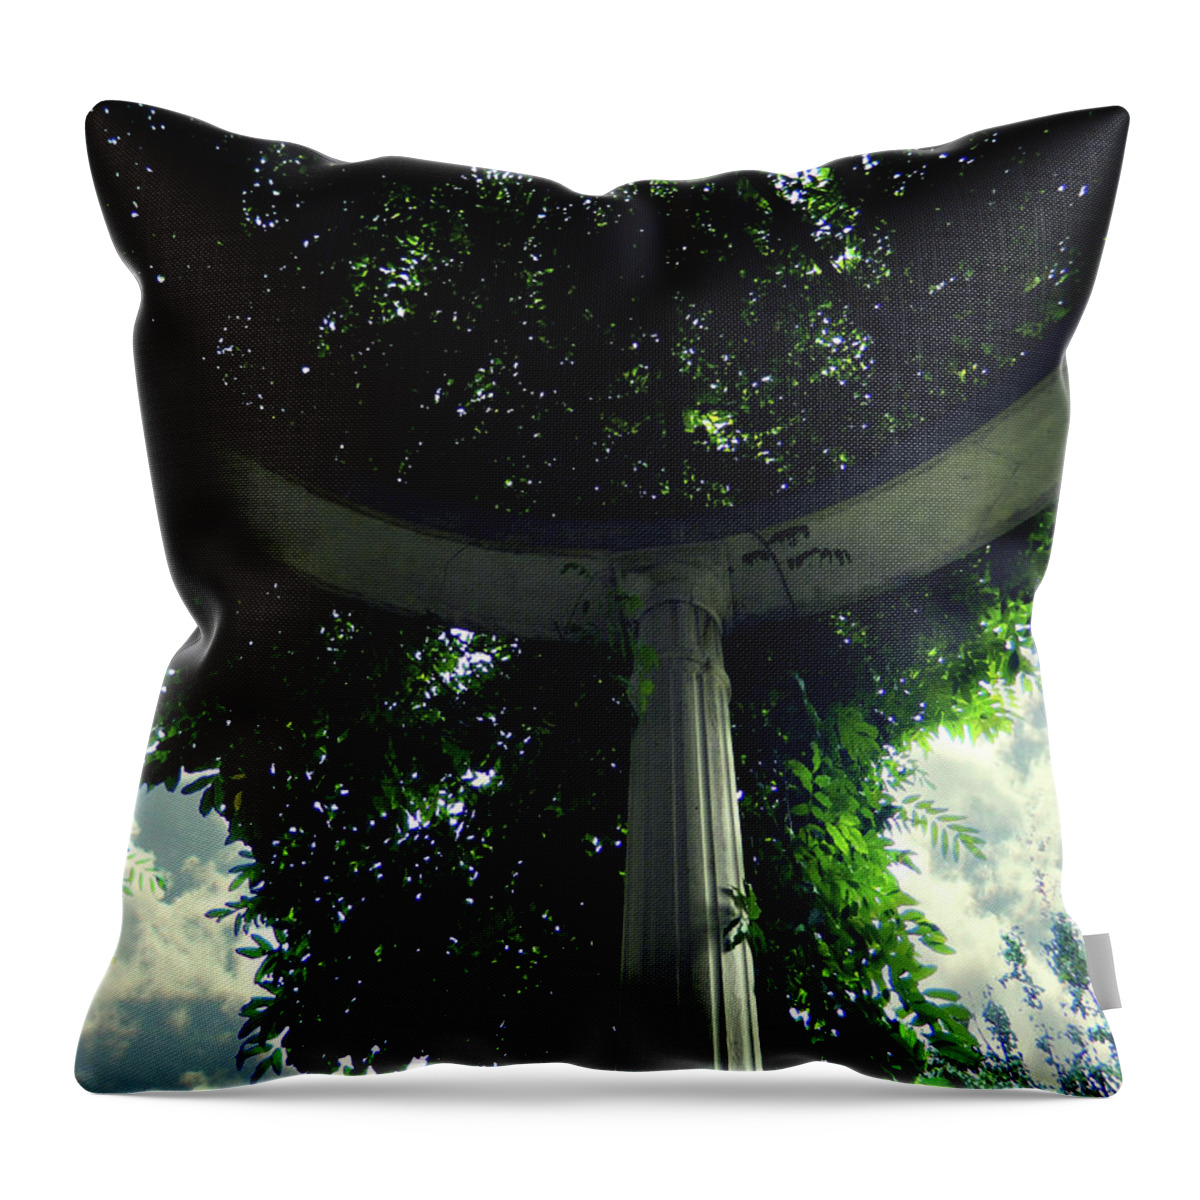 Inside The Arb Throw Pillow featuring the photograph Inside The Arb 3 by Cyryn Fyrcyd